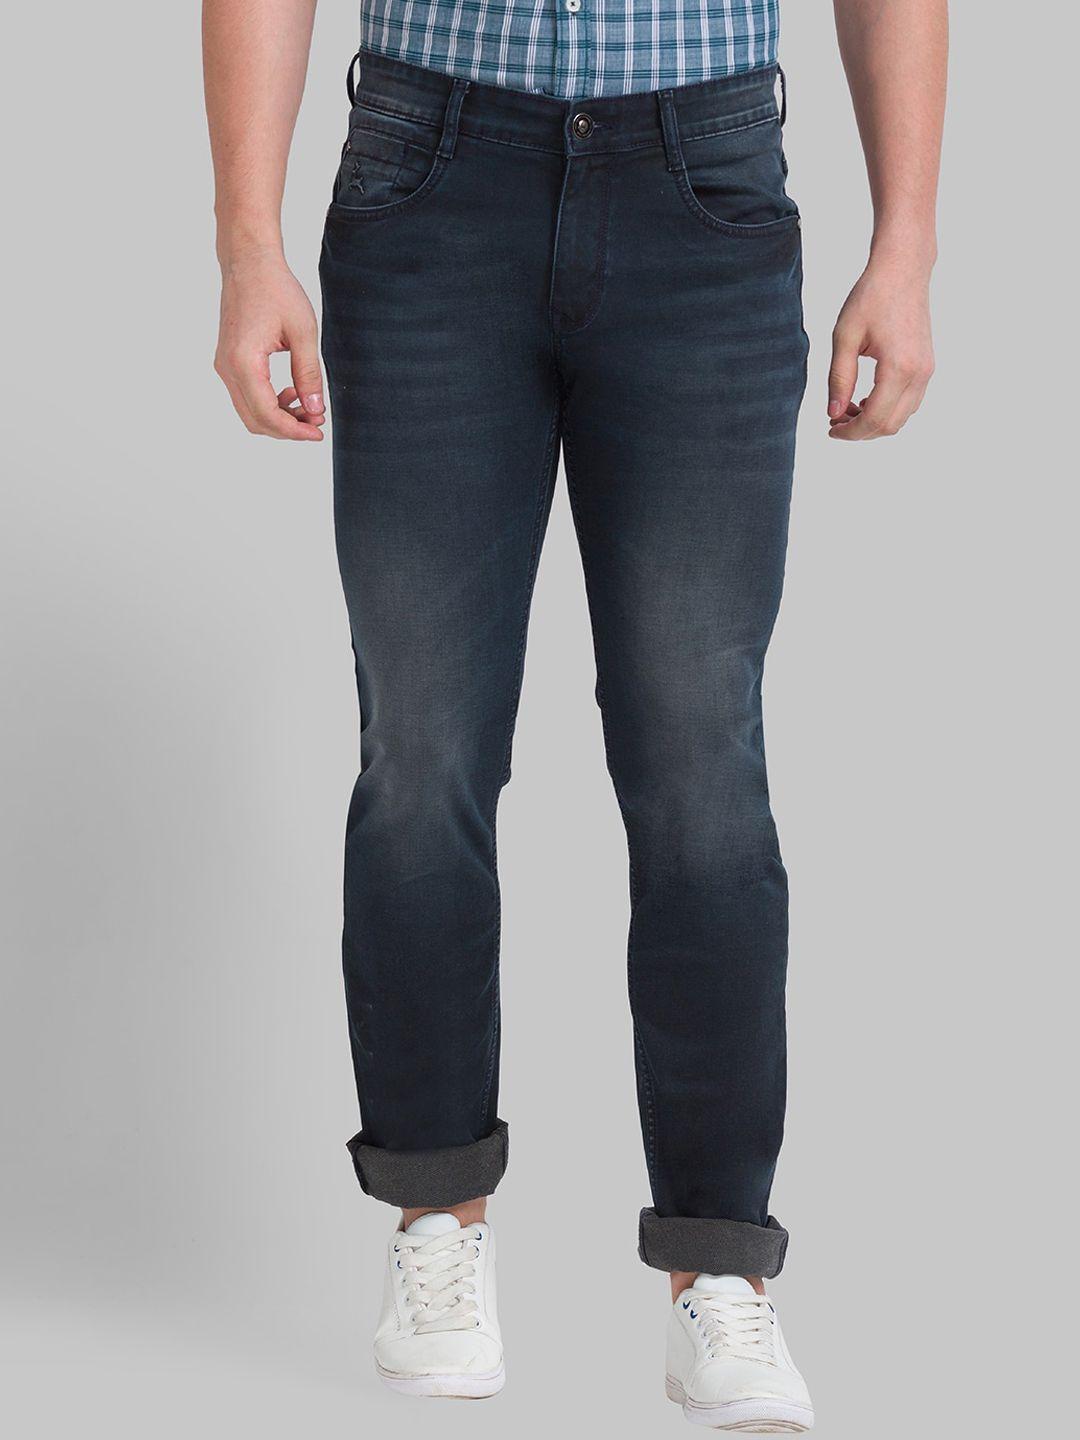 parx men grey tapered fit light fade jeans